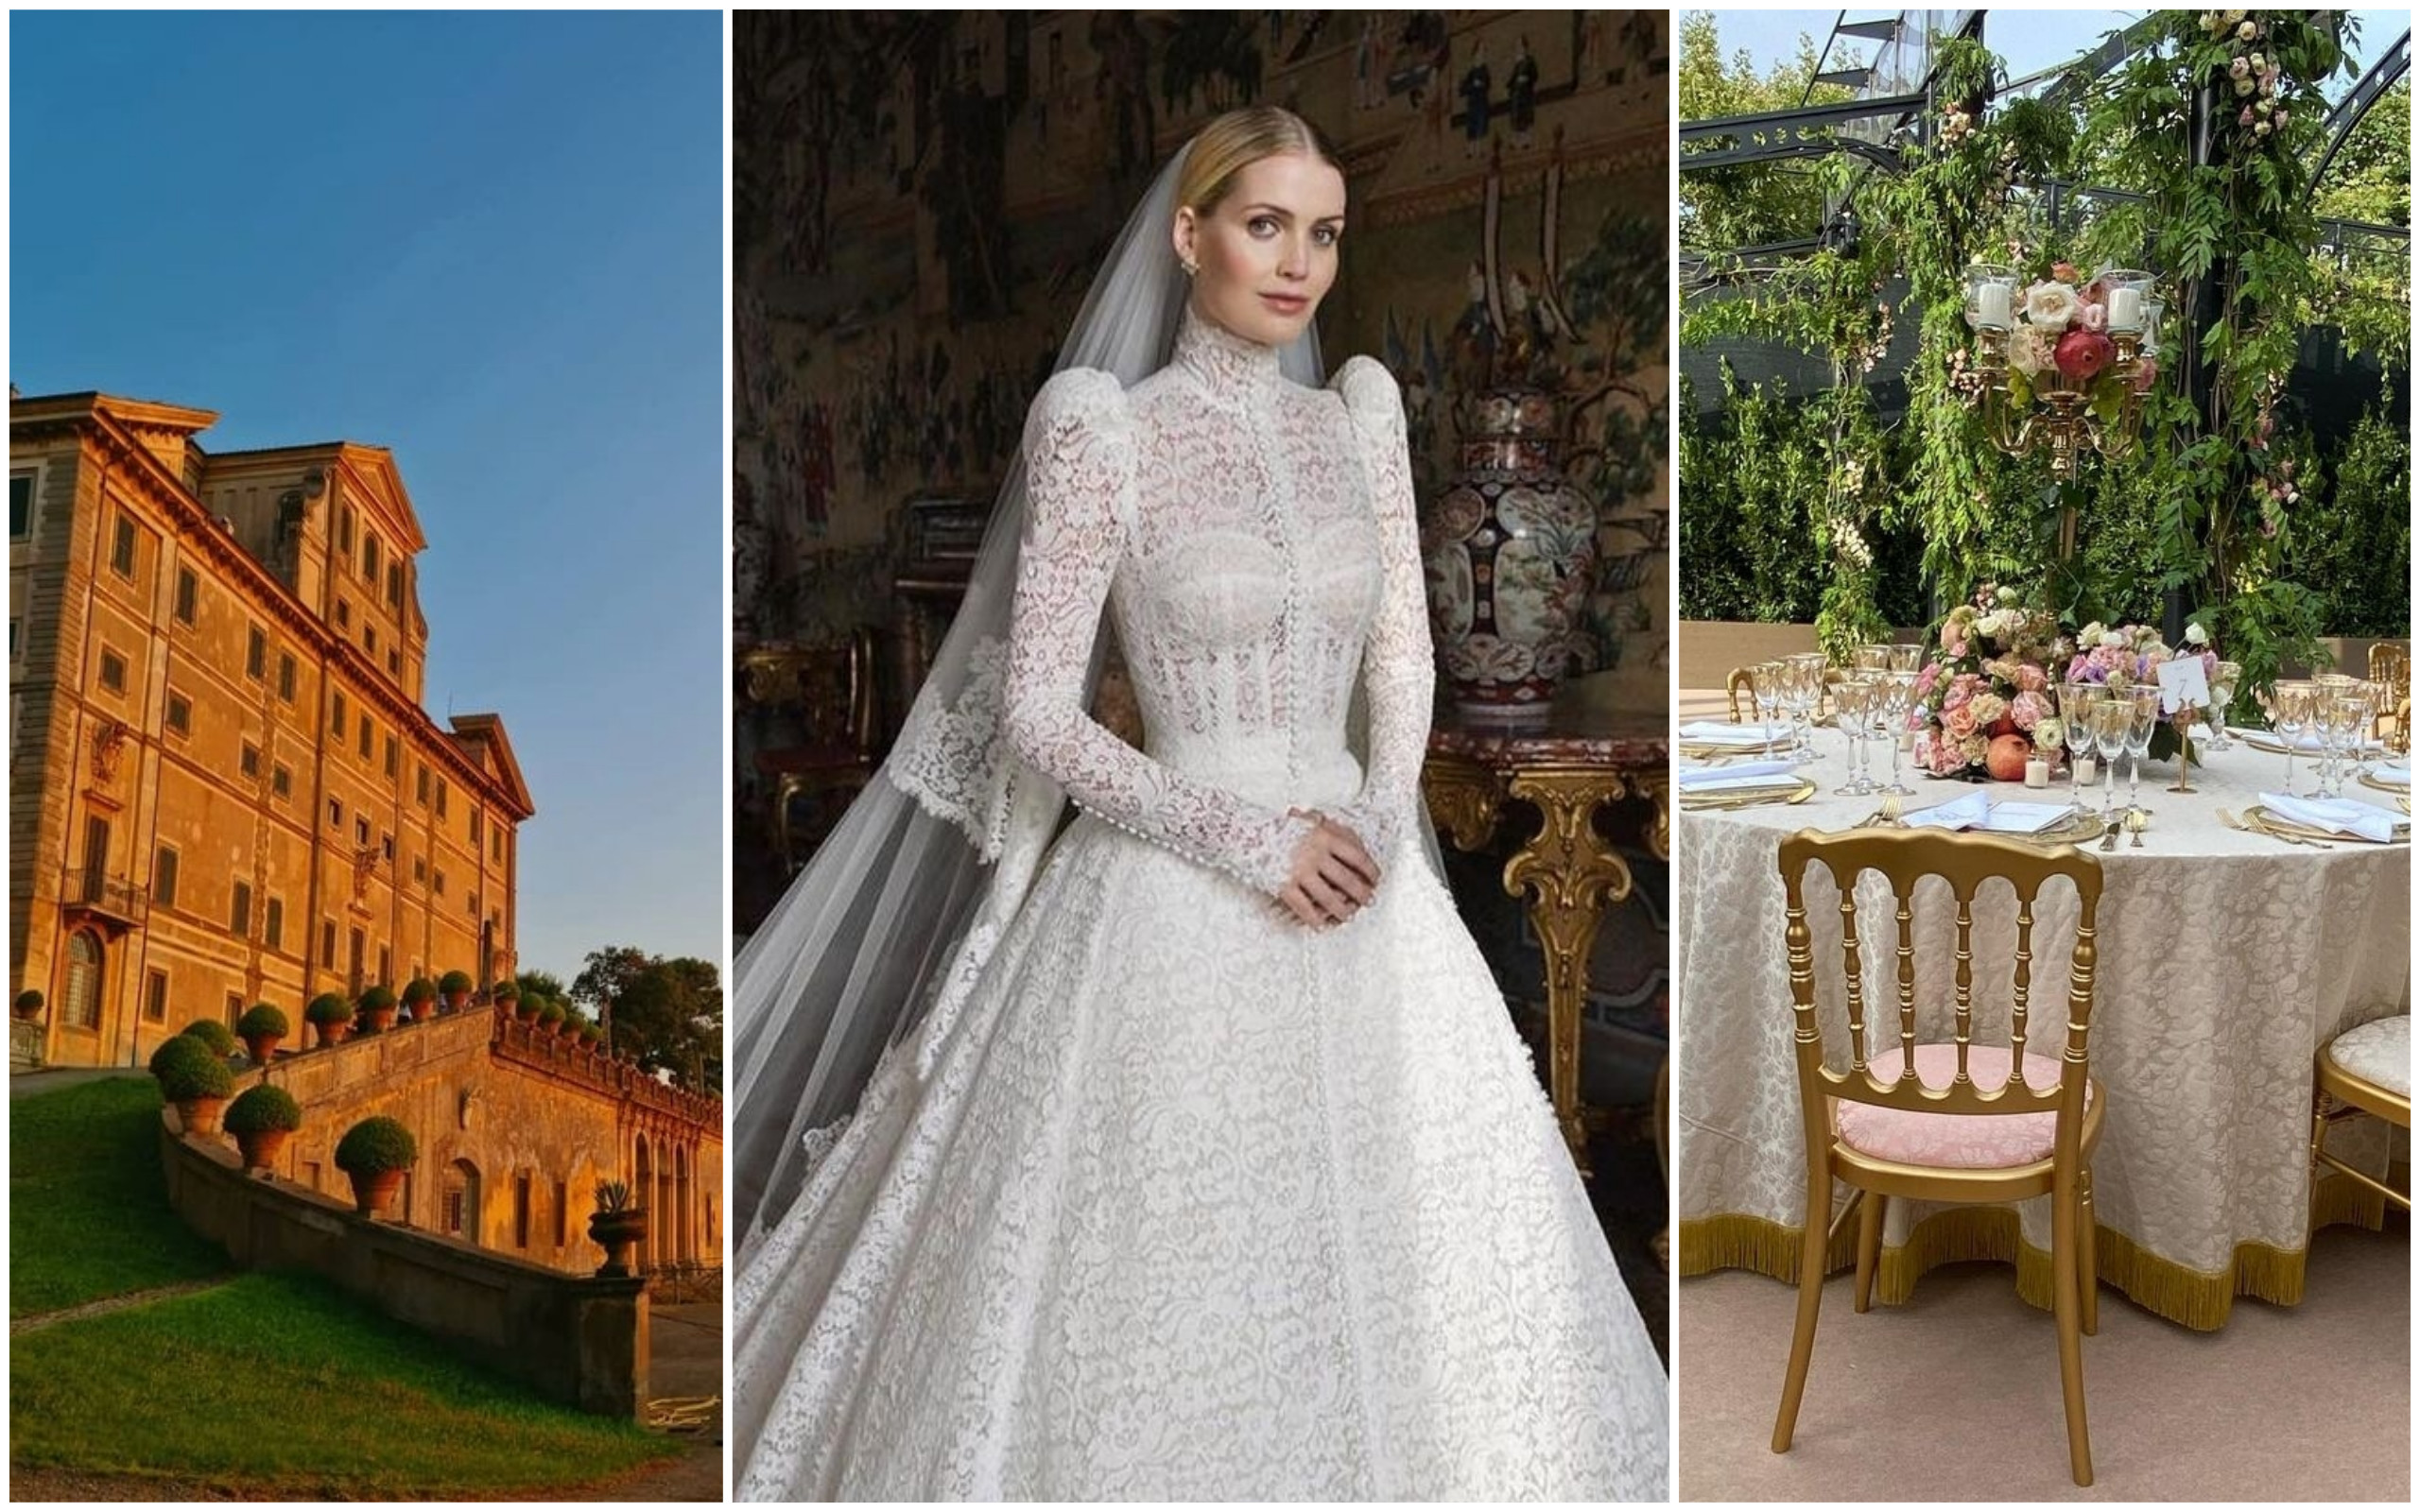 All the details of Lady Kitty Spencer's five wedding dresses